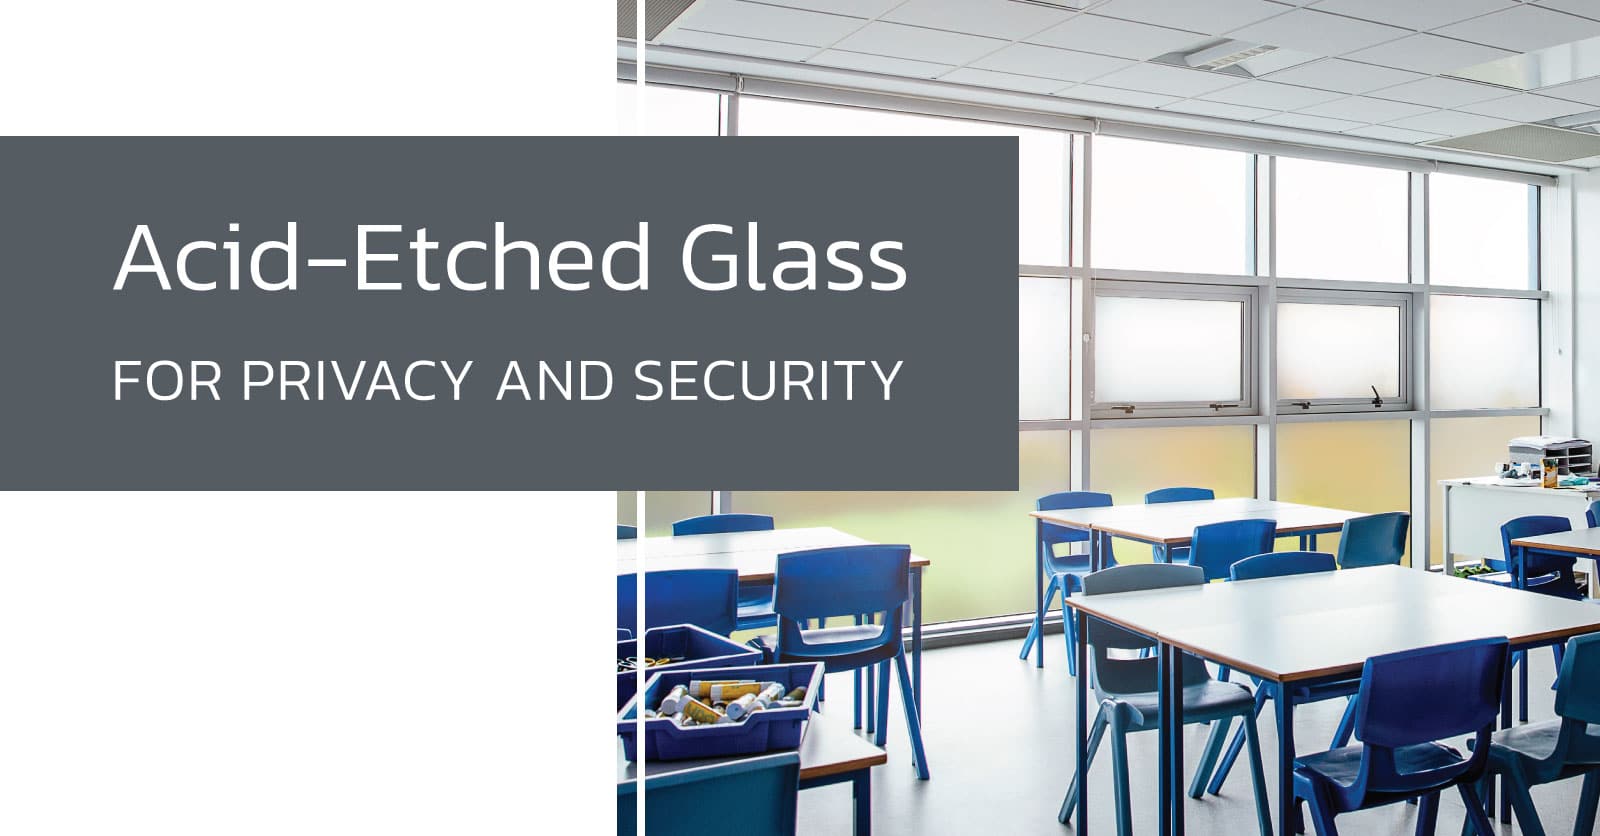 Acid-Etched Glass for Privacy and Security